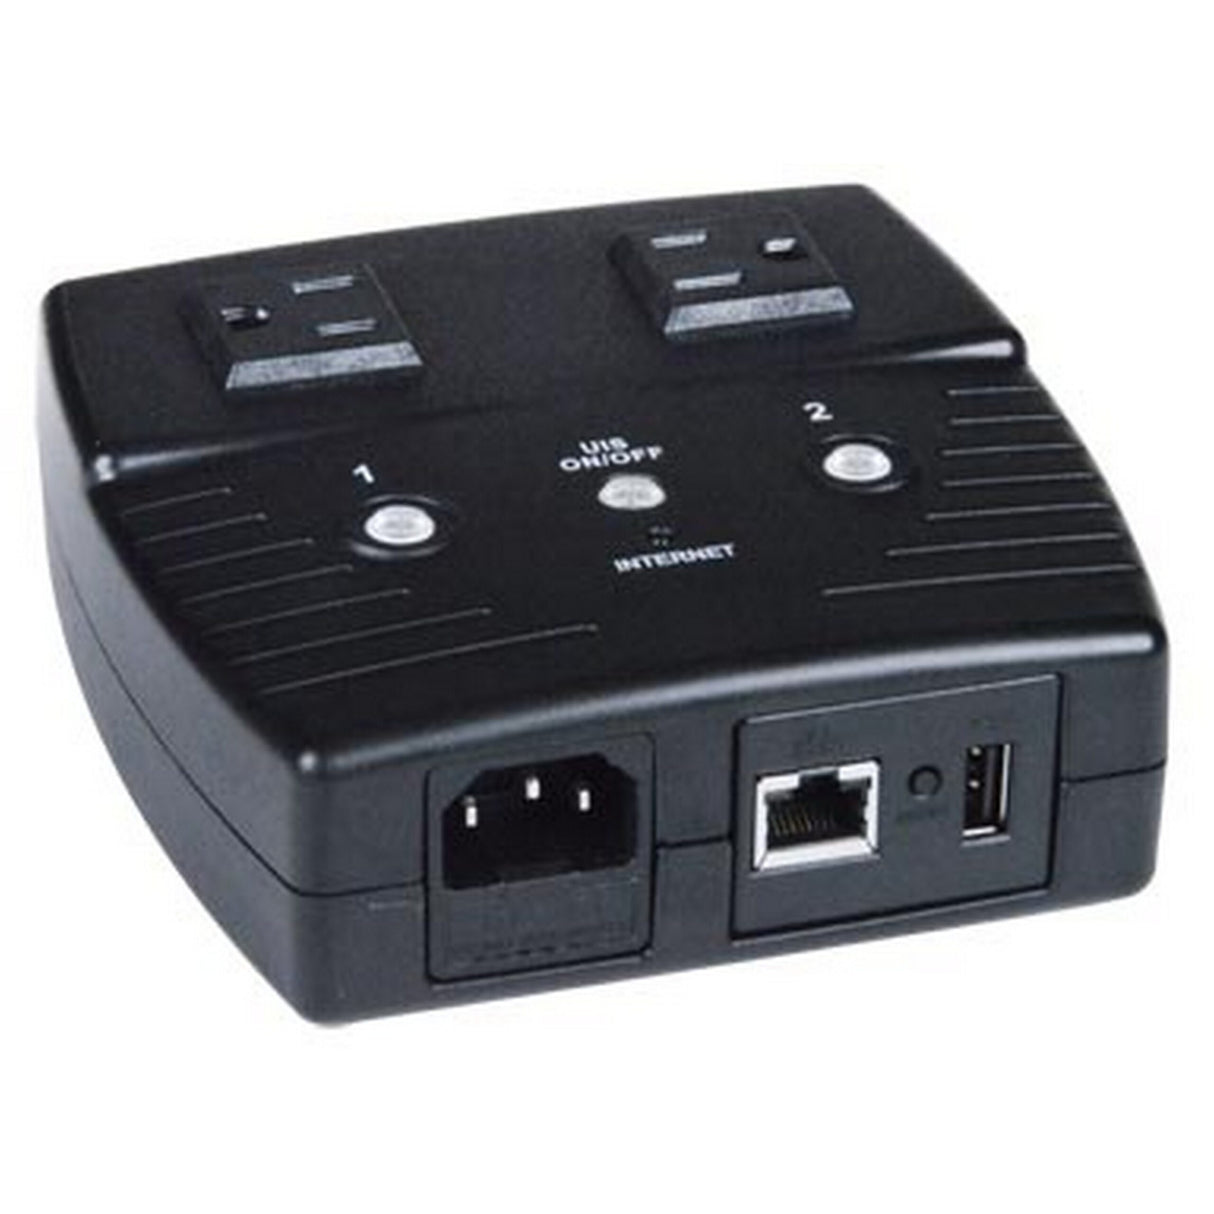 NTI PWR-RMT-RBT2-515R-LC Low-Cost 2-Port Remote Power Reboot Switch with NEMA 5-15R Outlets